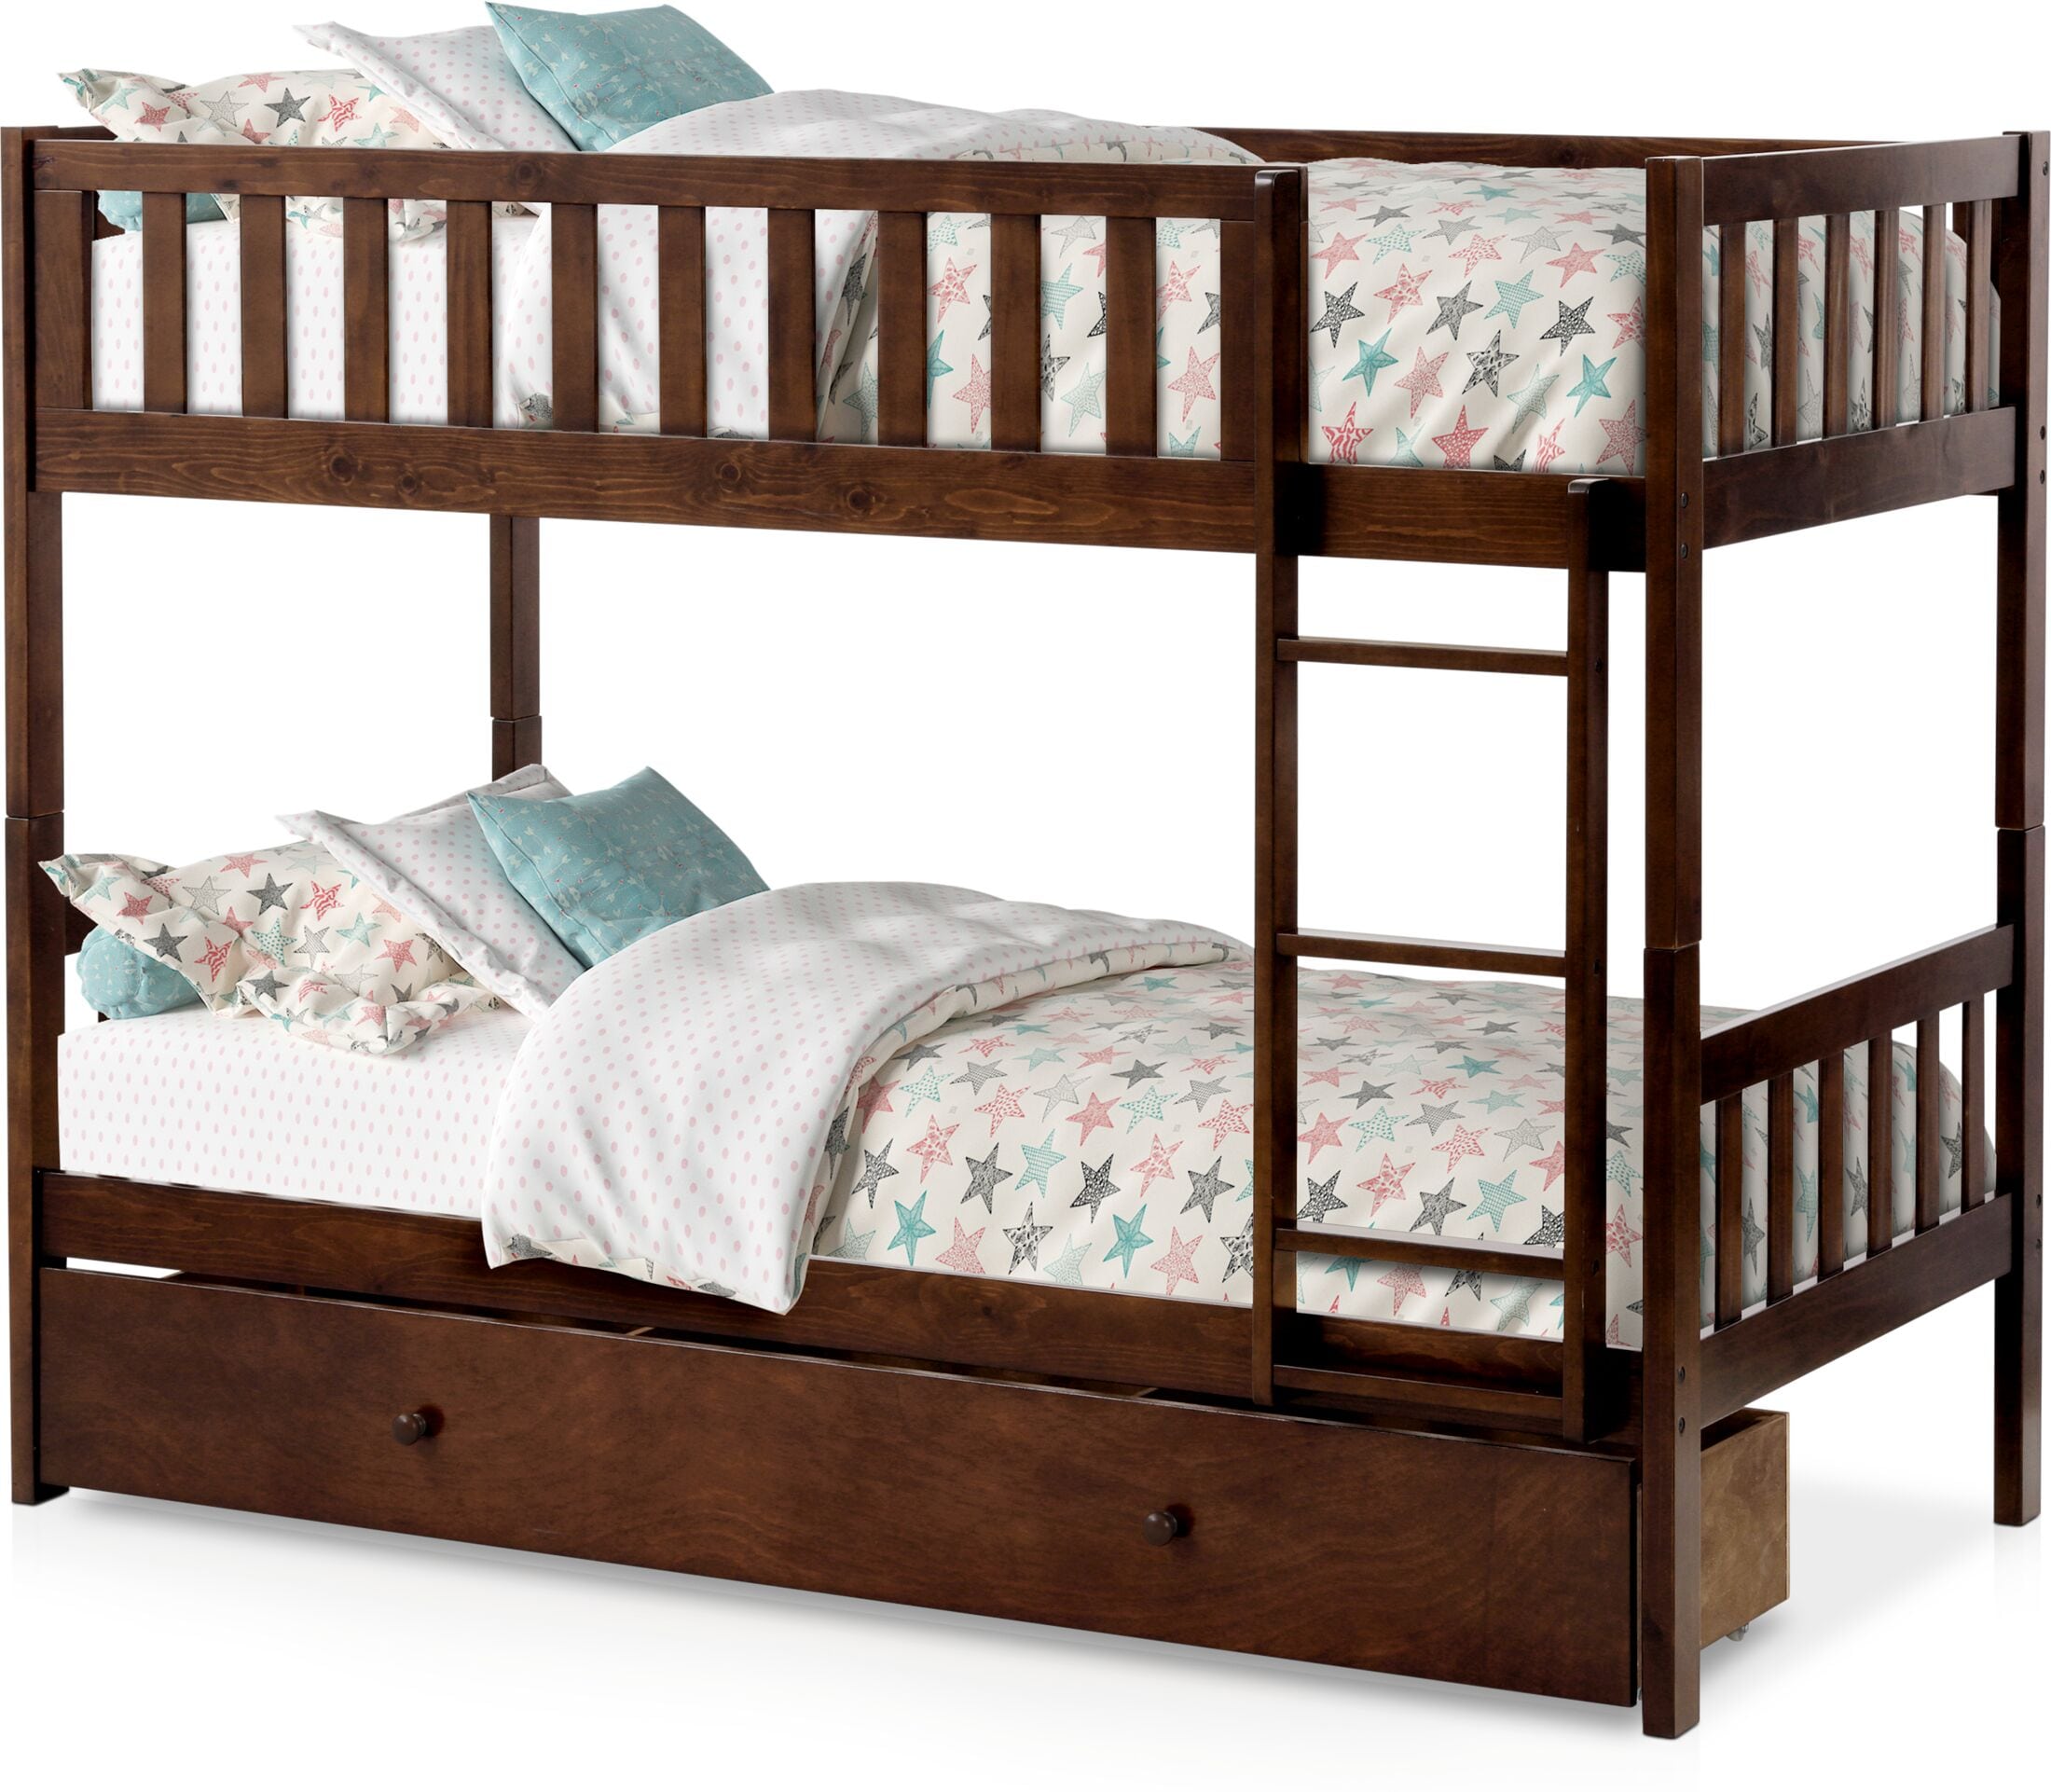 Undefined Value City Furniture, Stanley Furniture Company Bunk Beds